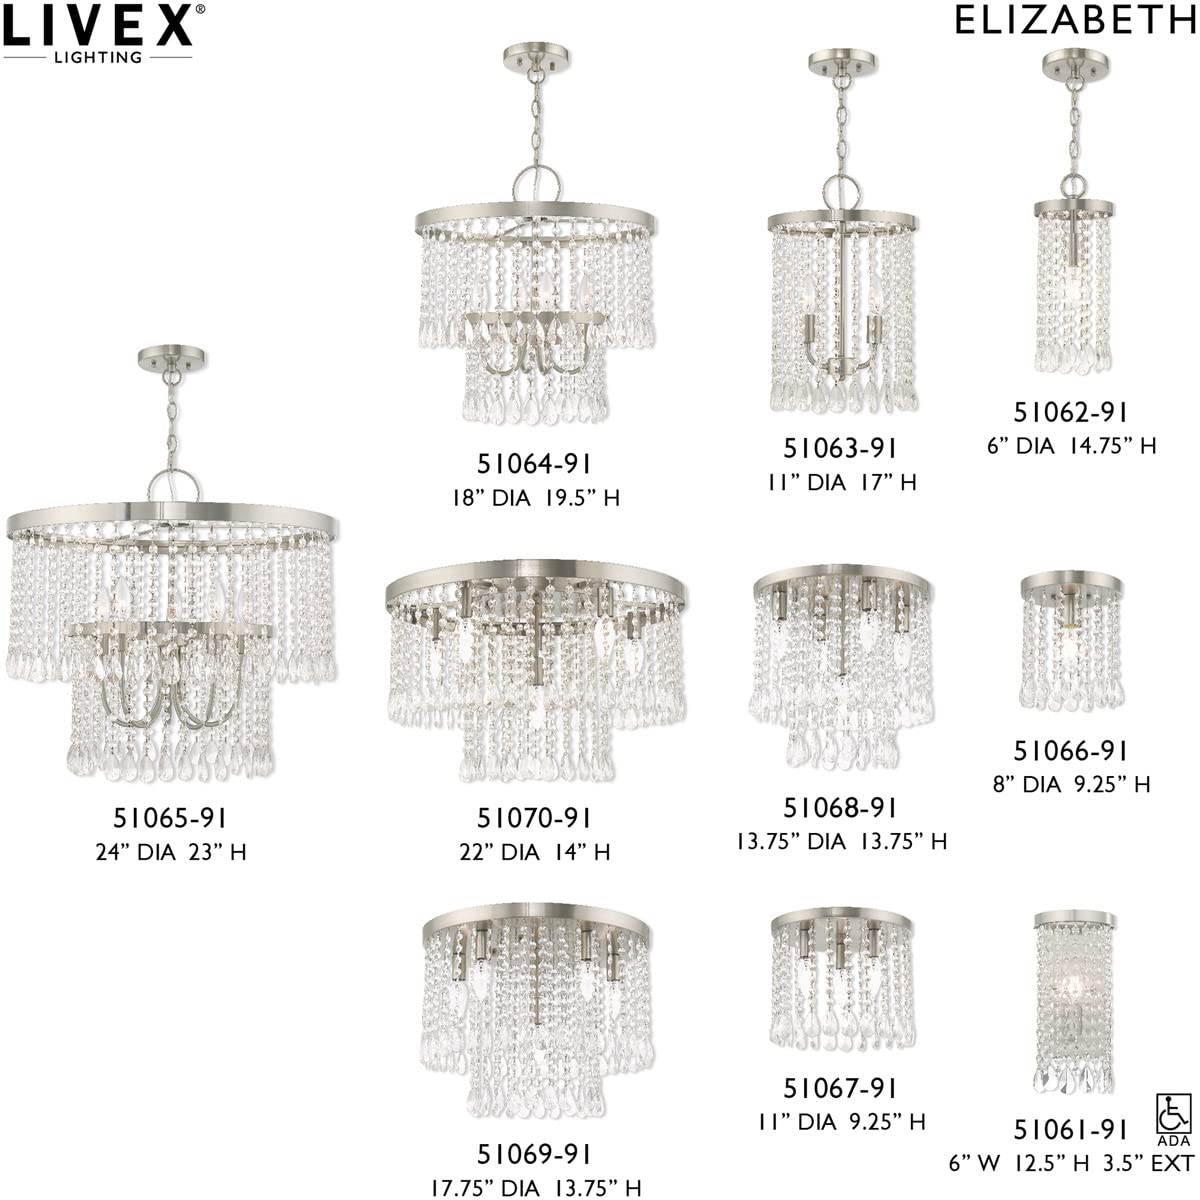 Livex Lighting 51063-91 Elizabeth - Two Light Mini Pendant, Brushed Nickel Finish with Clear Crystal